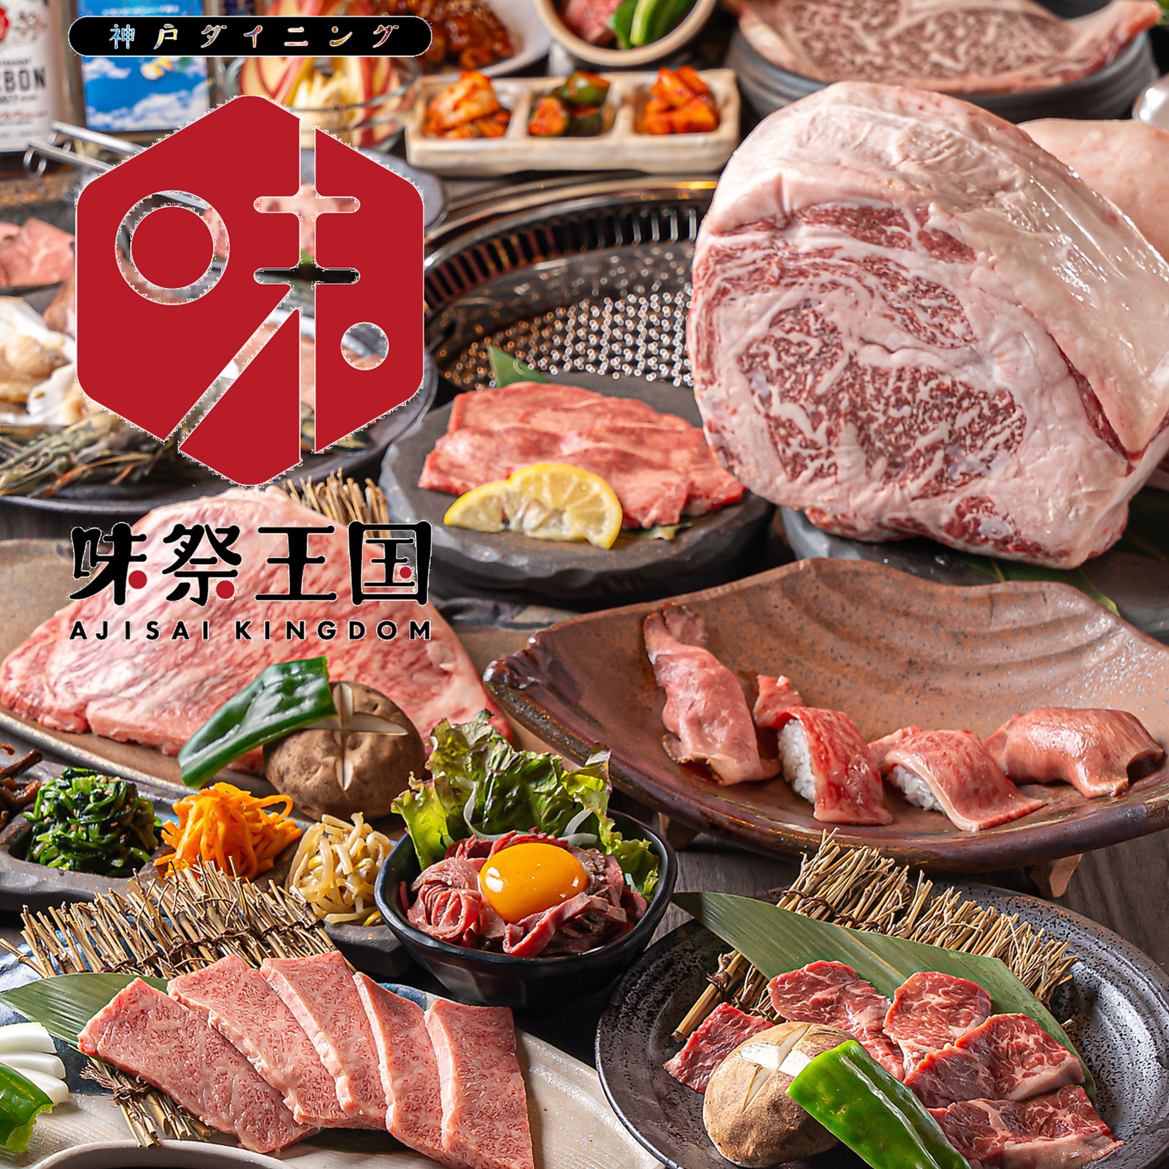 High-quality meat at an affordable price! All-you-can-eat yakiniku for 75 minutes from ¥2,180 (tax included)